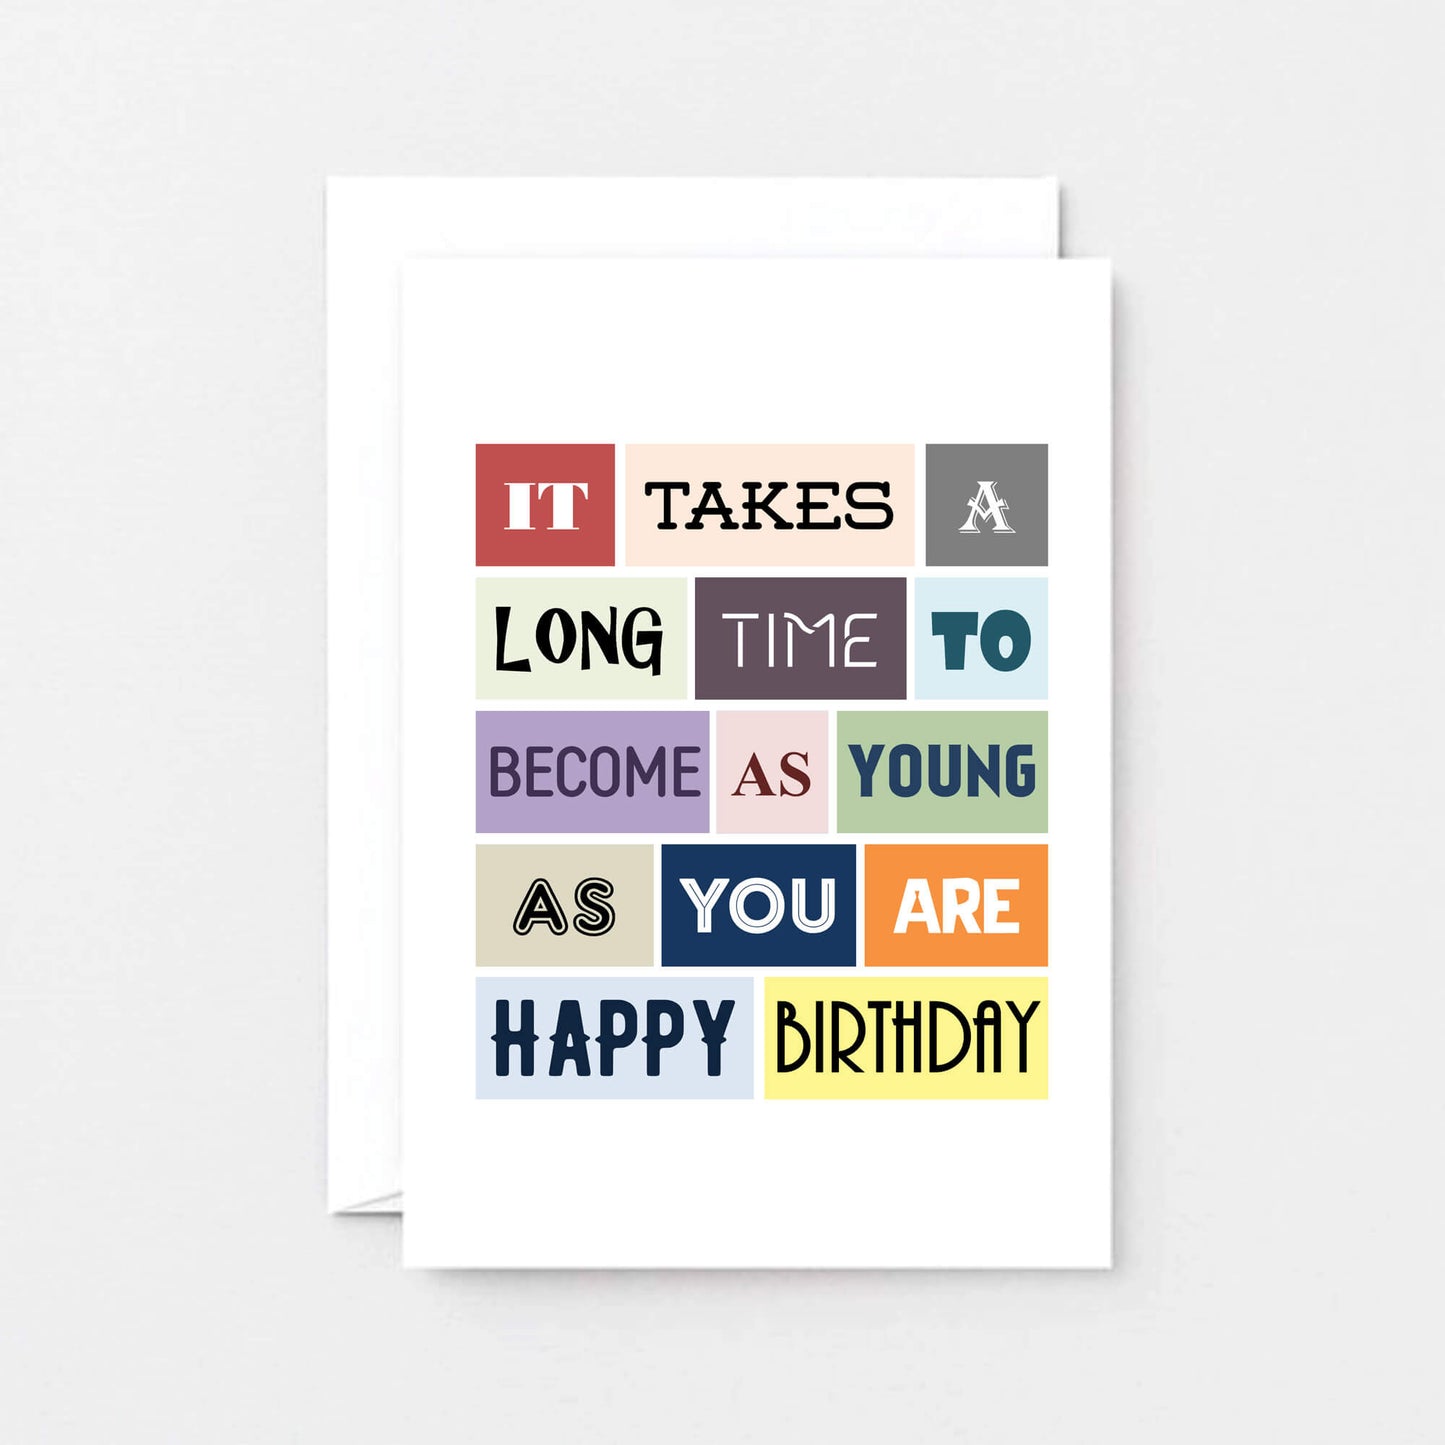 Sarcastic Birthday Card by SixElevenCreations. Reads It takes a long time to become as young as you are. Happy birthday. Product Code SE0027A6